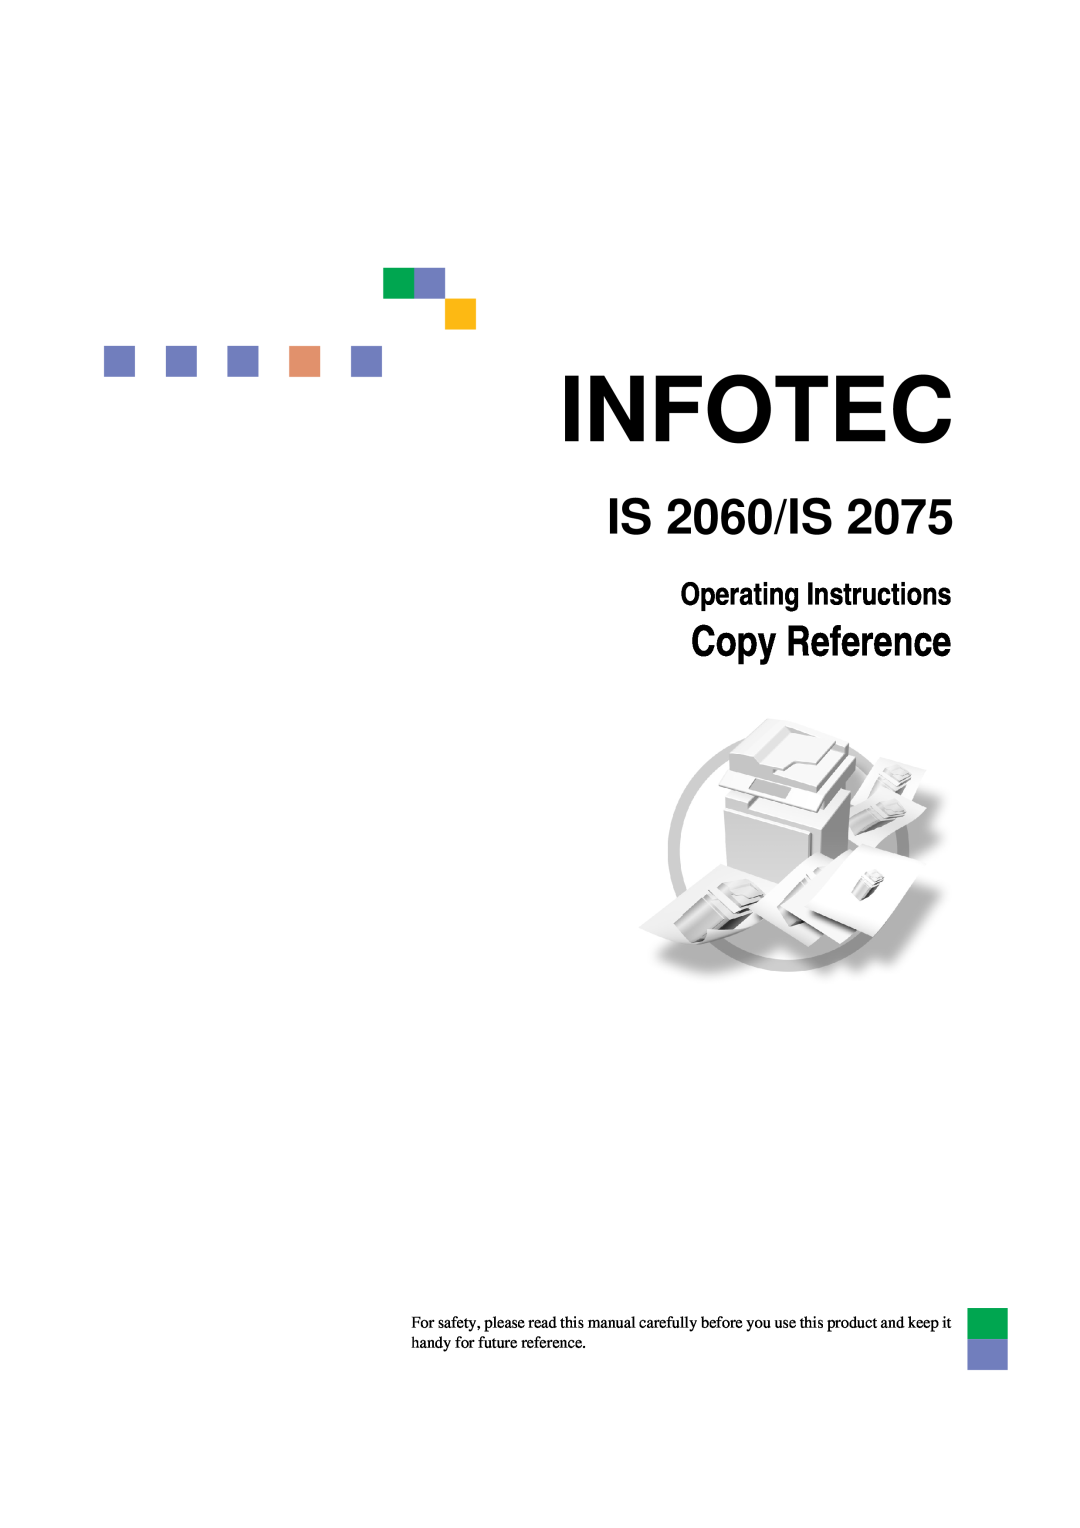 Ricoh IS 2075 operating instructions 1060/1075, Infotec, IS 2060/IS, Copy Reference, Operating Instructions 